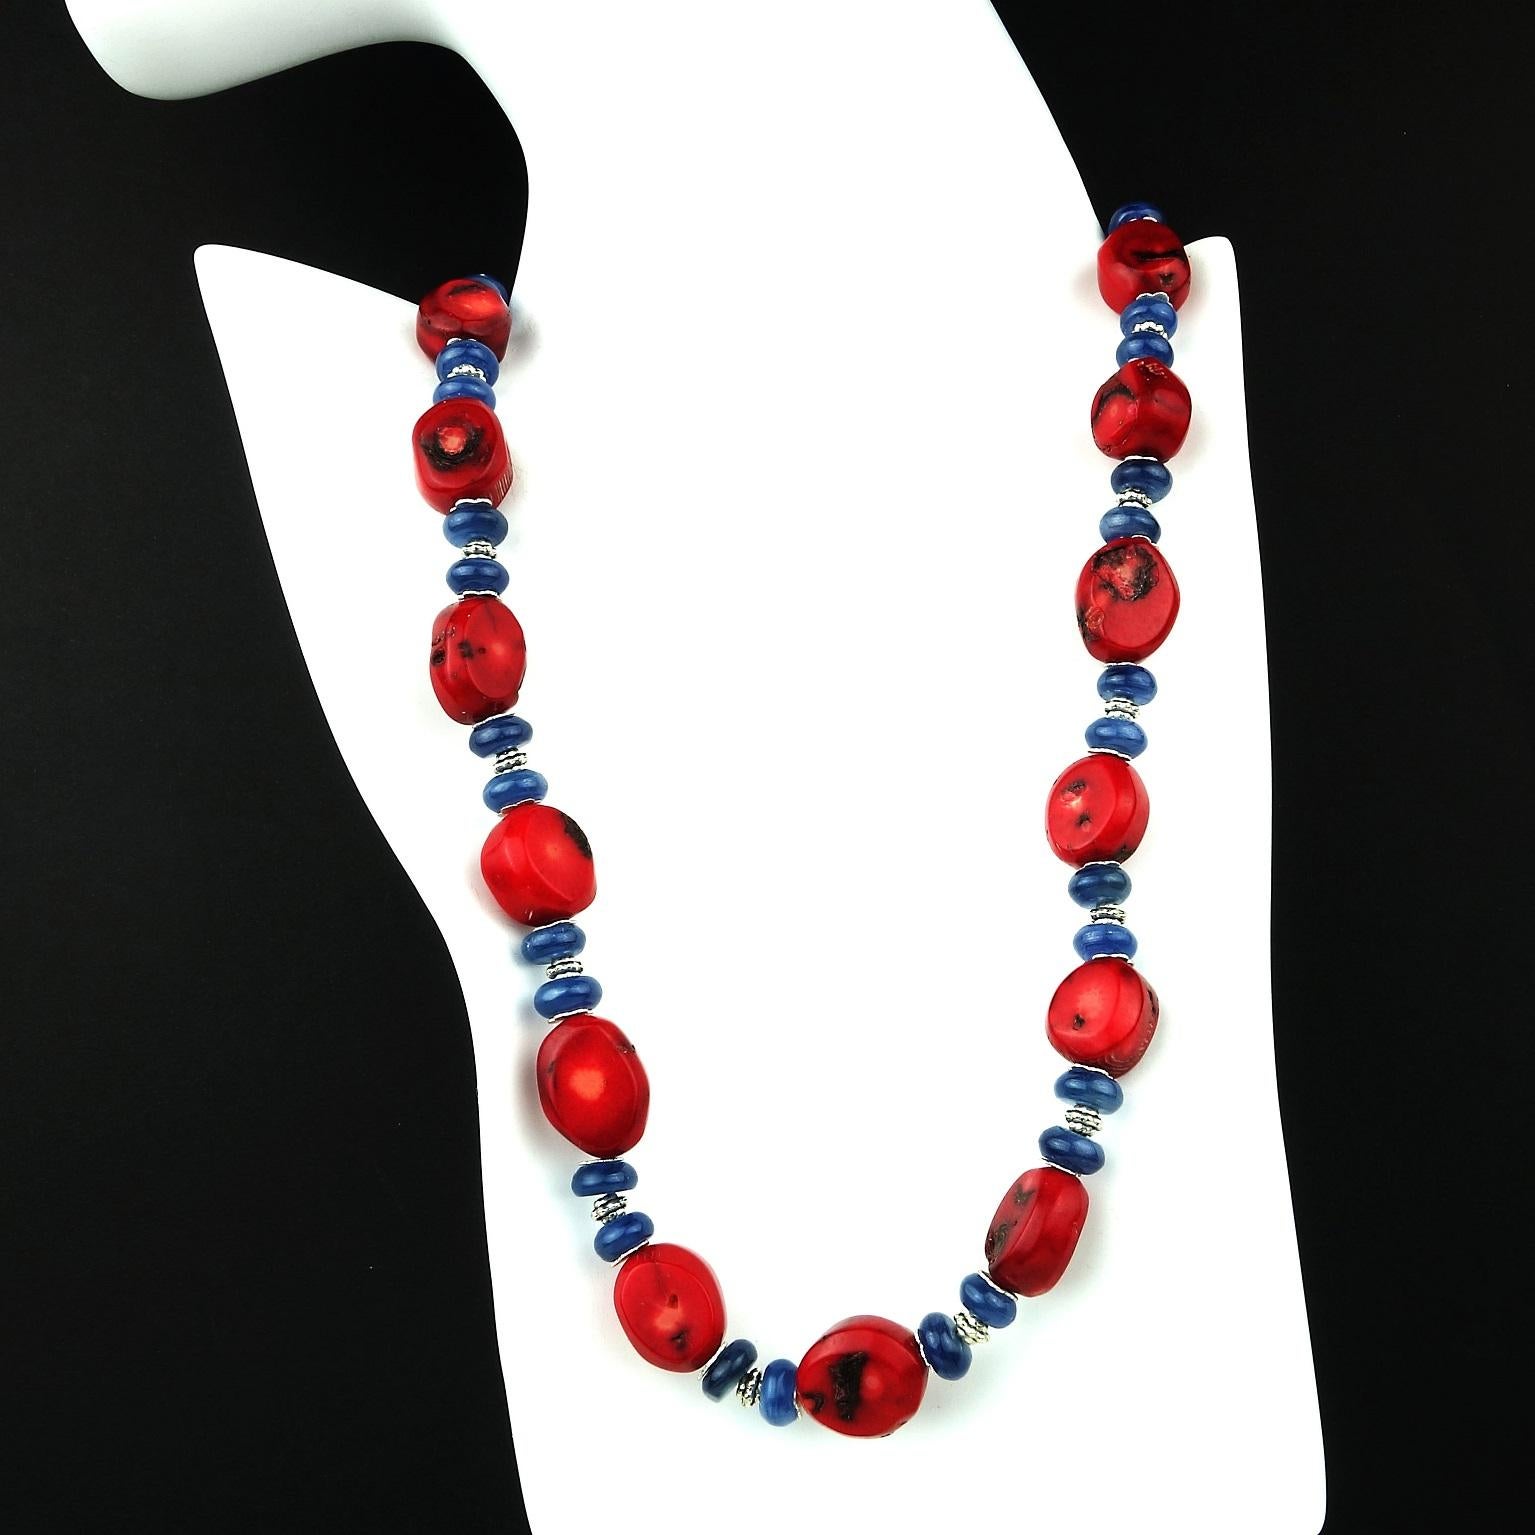 This unique necklace is an updated Southwest look with  Red Coral and Blue Kyanite accented with detailed silvery spacers and a blue demortierite with Sterling Silver hooks clasp.  The deep red bamboo coral is gently faceted and has interesting